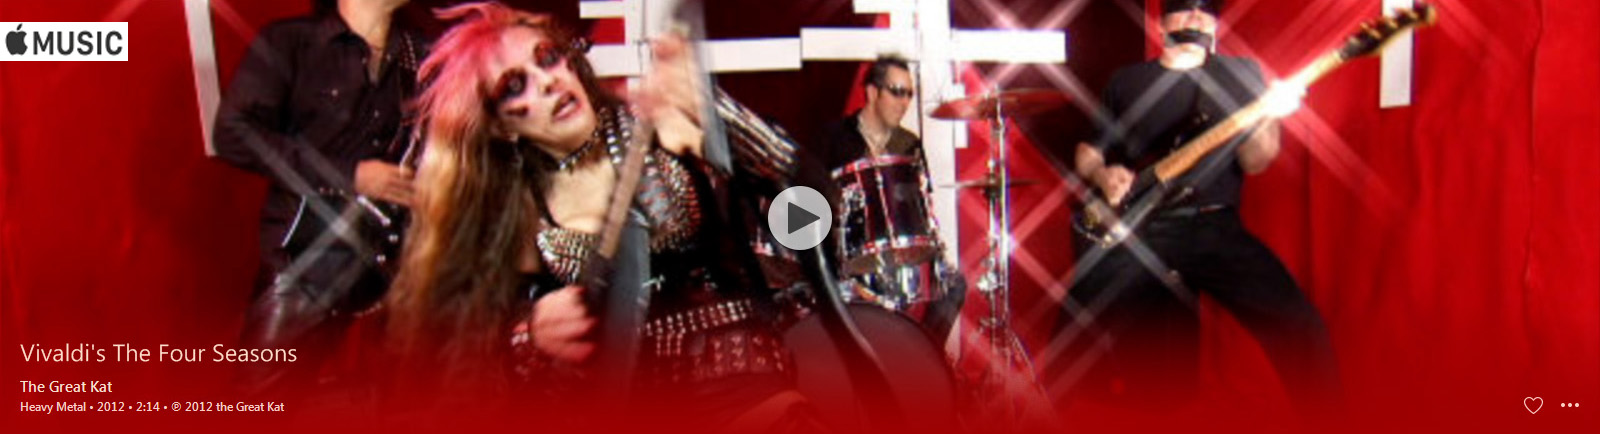 APPLE MUSIC is NOW STREAMING The Great Kat's VIVALDI'S "THE FOUR SEASONS" MUSIC VIDEO!